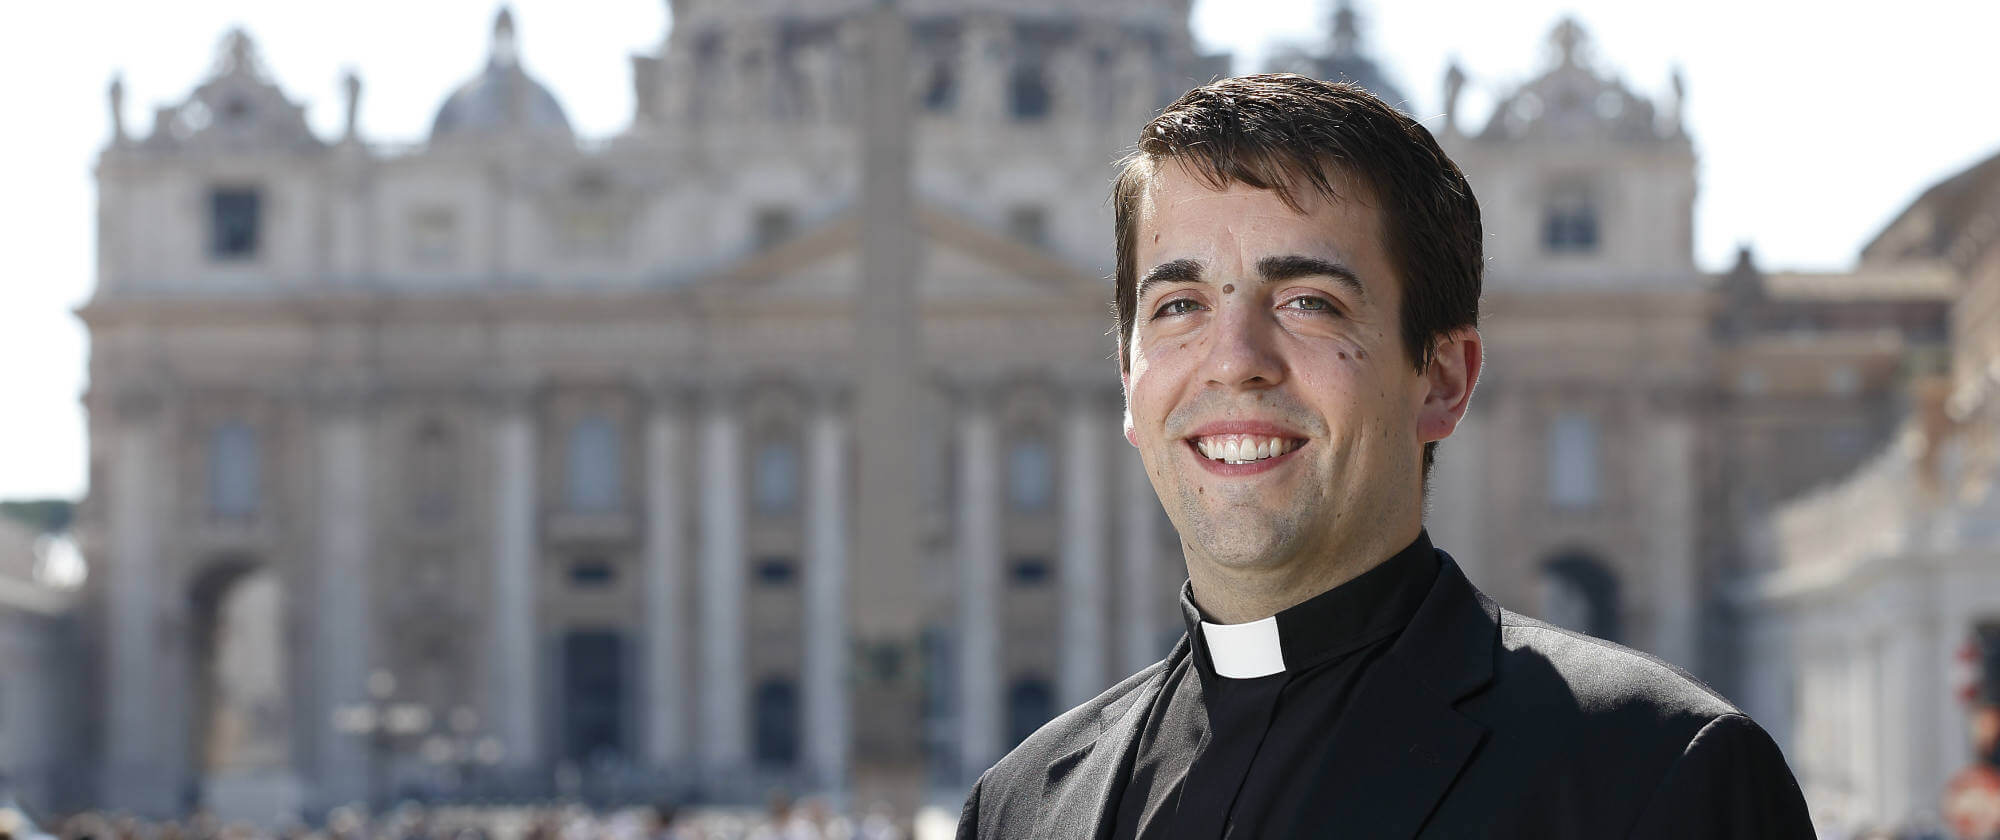 Ewing’s June 24 ordination to the priesthood will be bittersweet